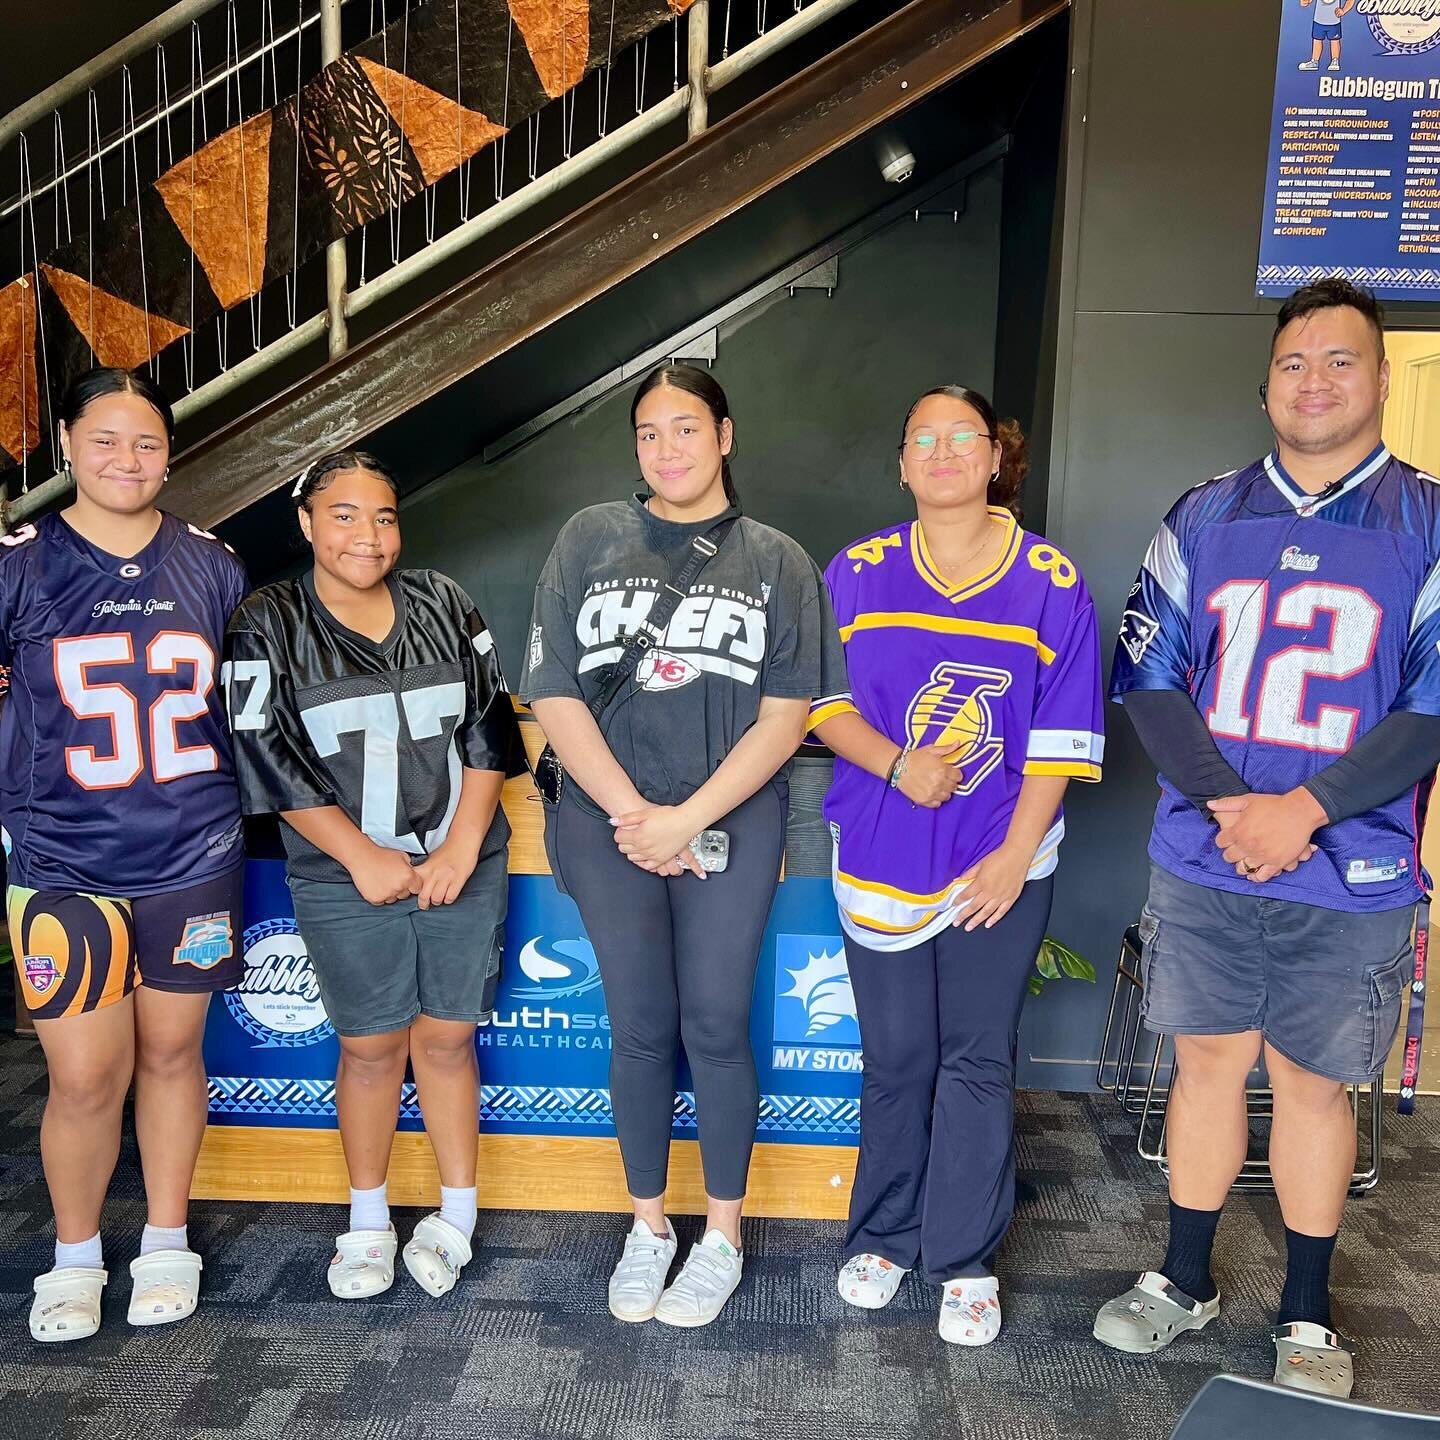 Day 3 of Bubblegum&rsquo;s Free Back to School Holiday Programme 🏈⚽️😎🏆🏀🏐 Sports Day

Super important that we encourage our rangatahi to stay active and emphasise how physical activity contributes to our overall health and wellbeing 😌

Young peo